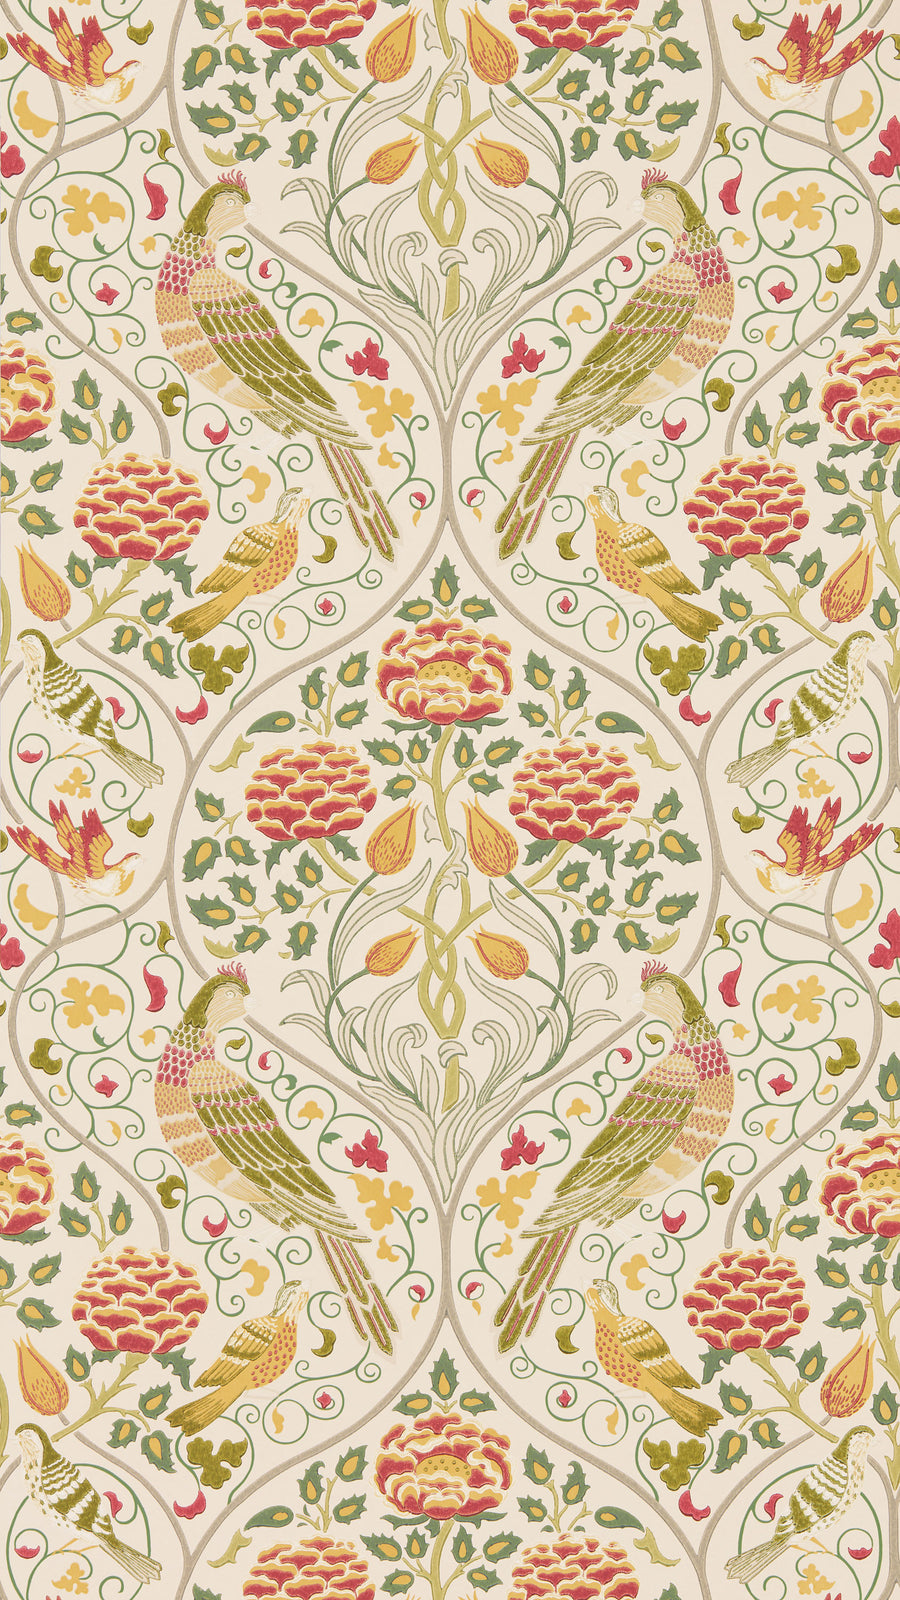 MORRIS & Co.(ウィリアム・モリス) / Archive Wallpapers 5 MELSETTER / Seasons by May 216687